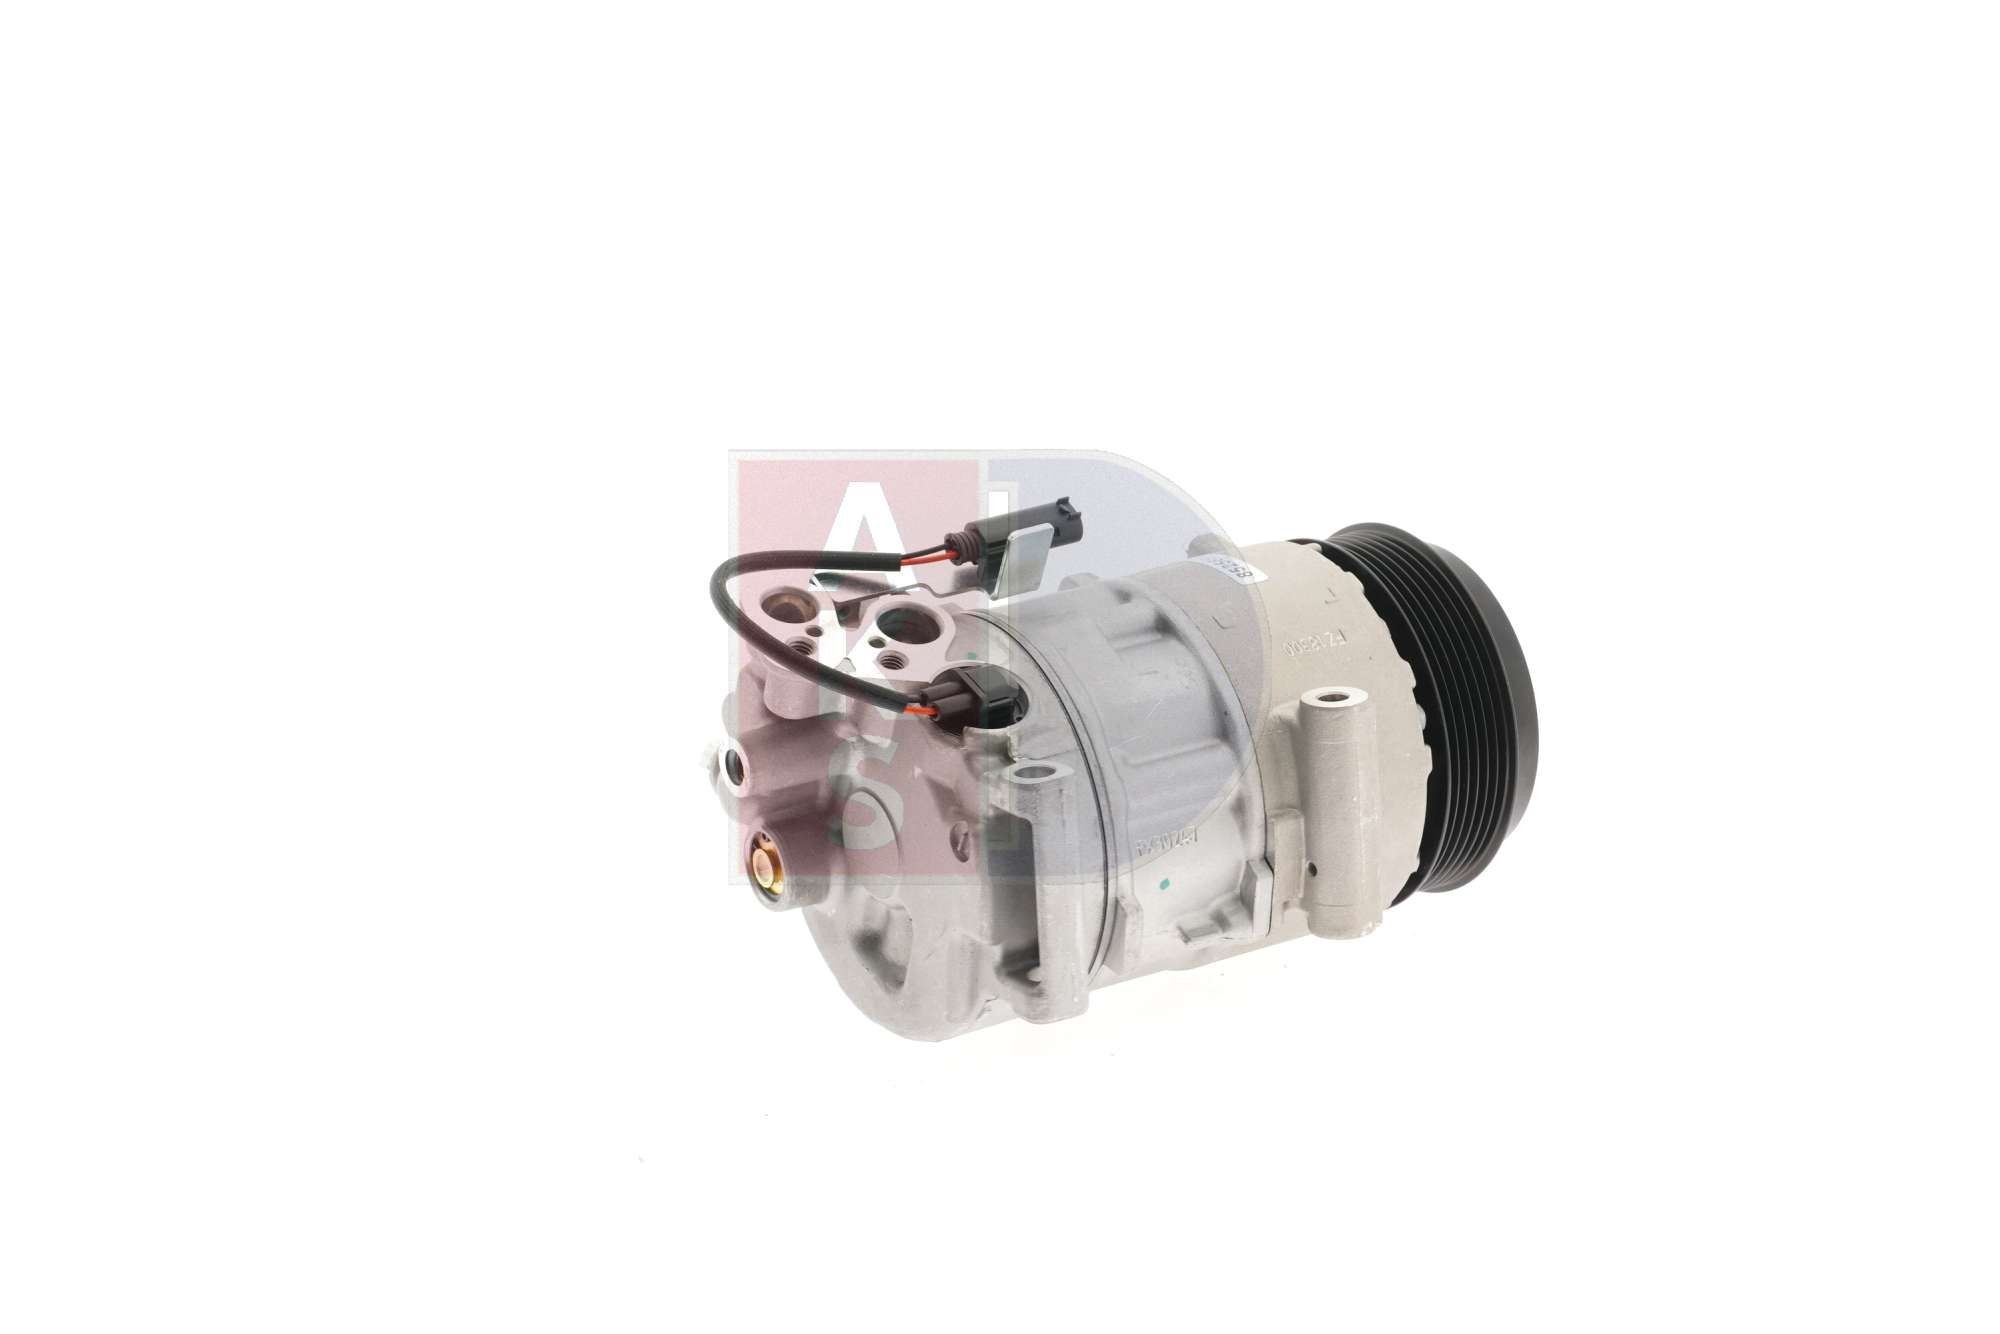 Air conditioning compressor 852589N from AKS DASIS